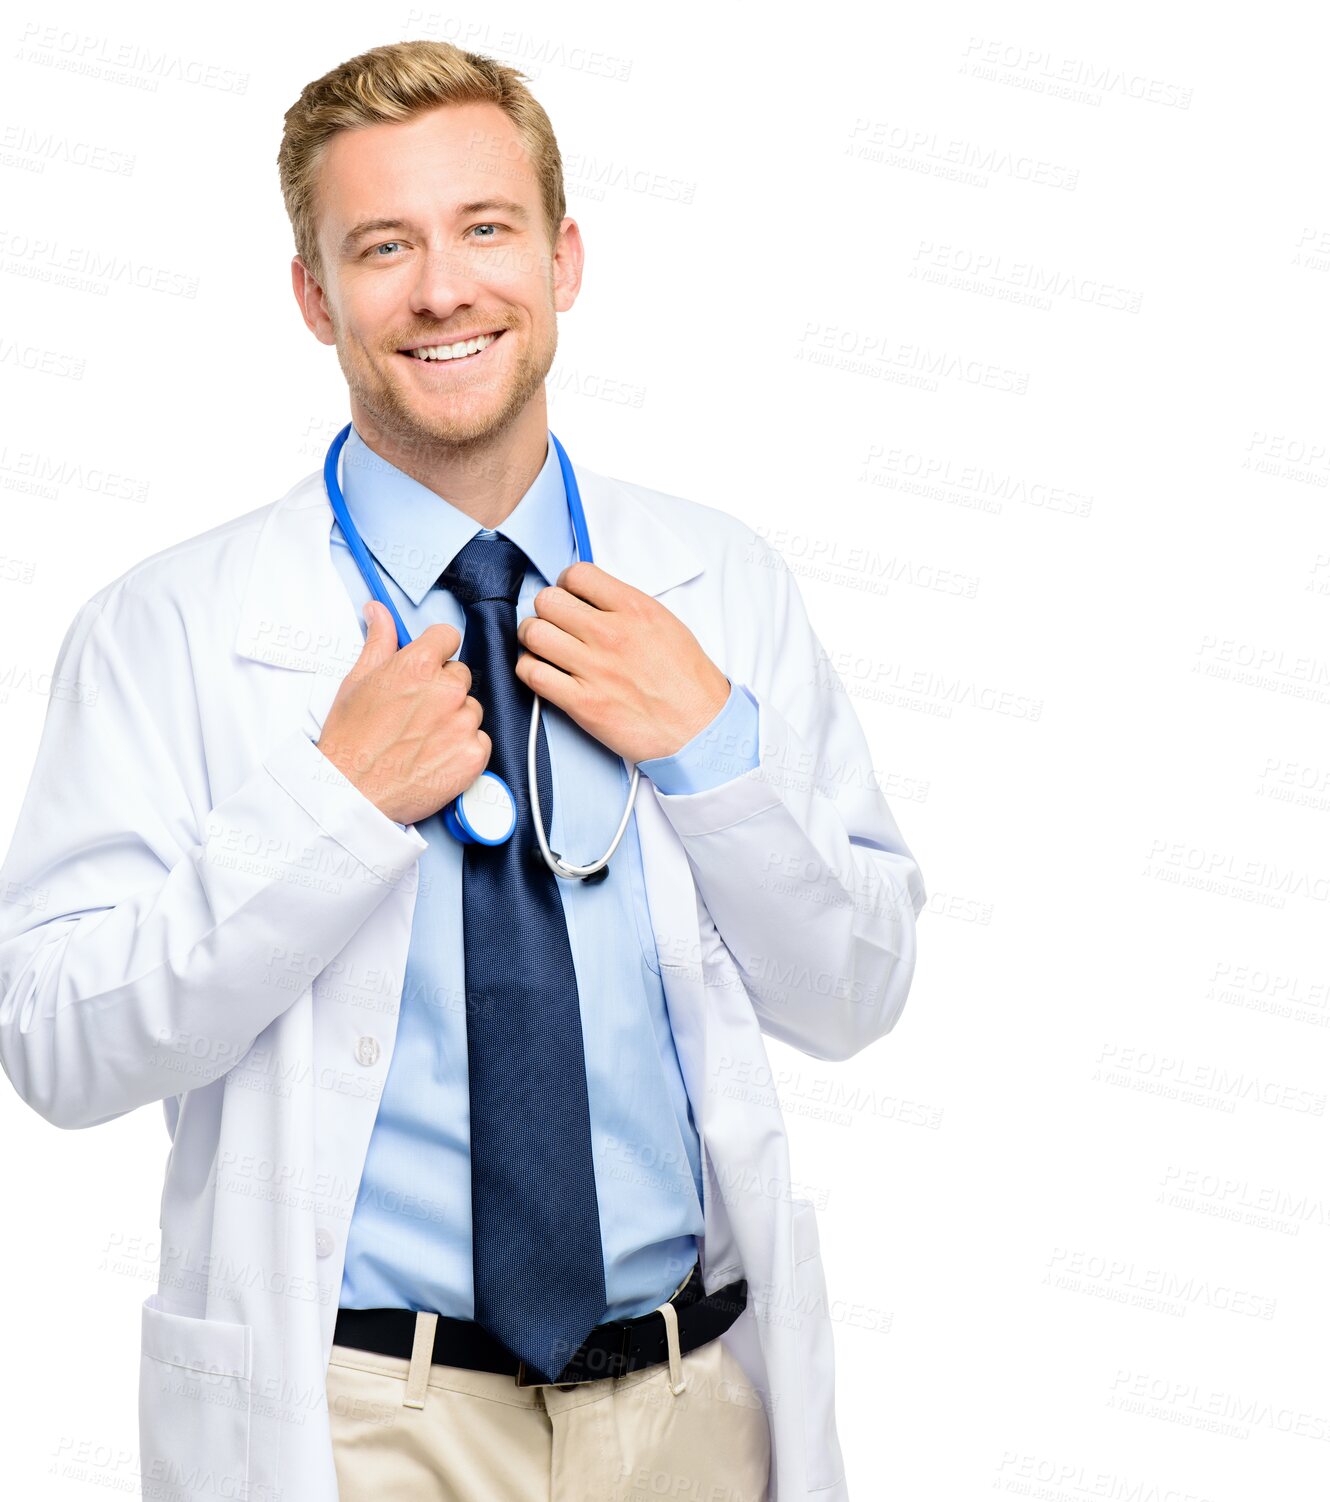 Buy stock photo Portrait, doctor or happy man with smile or confidence isolated on transparent png background. Face, proud consultant or confident medical worker smiling with a stethoscope or tools for wellness 